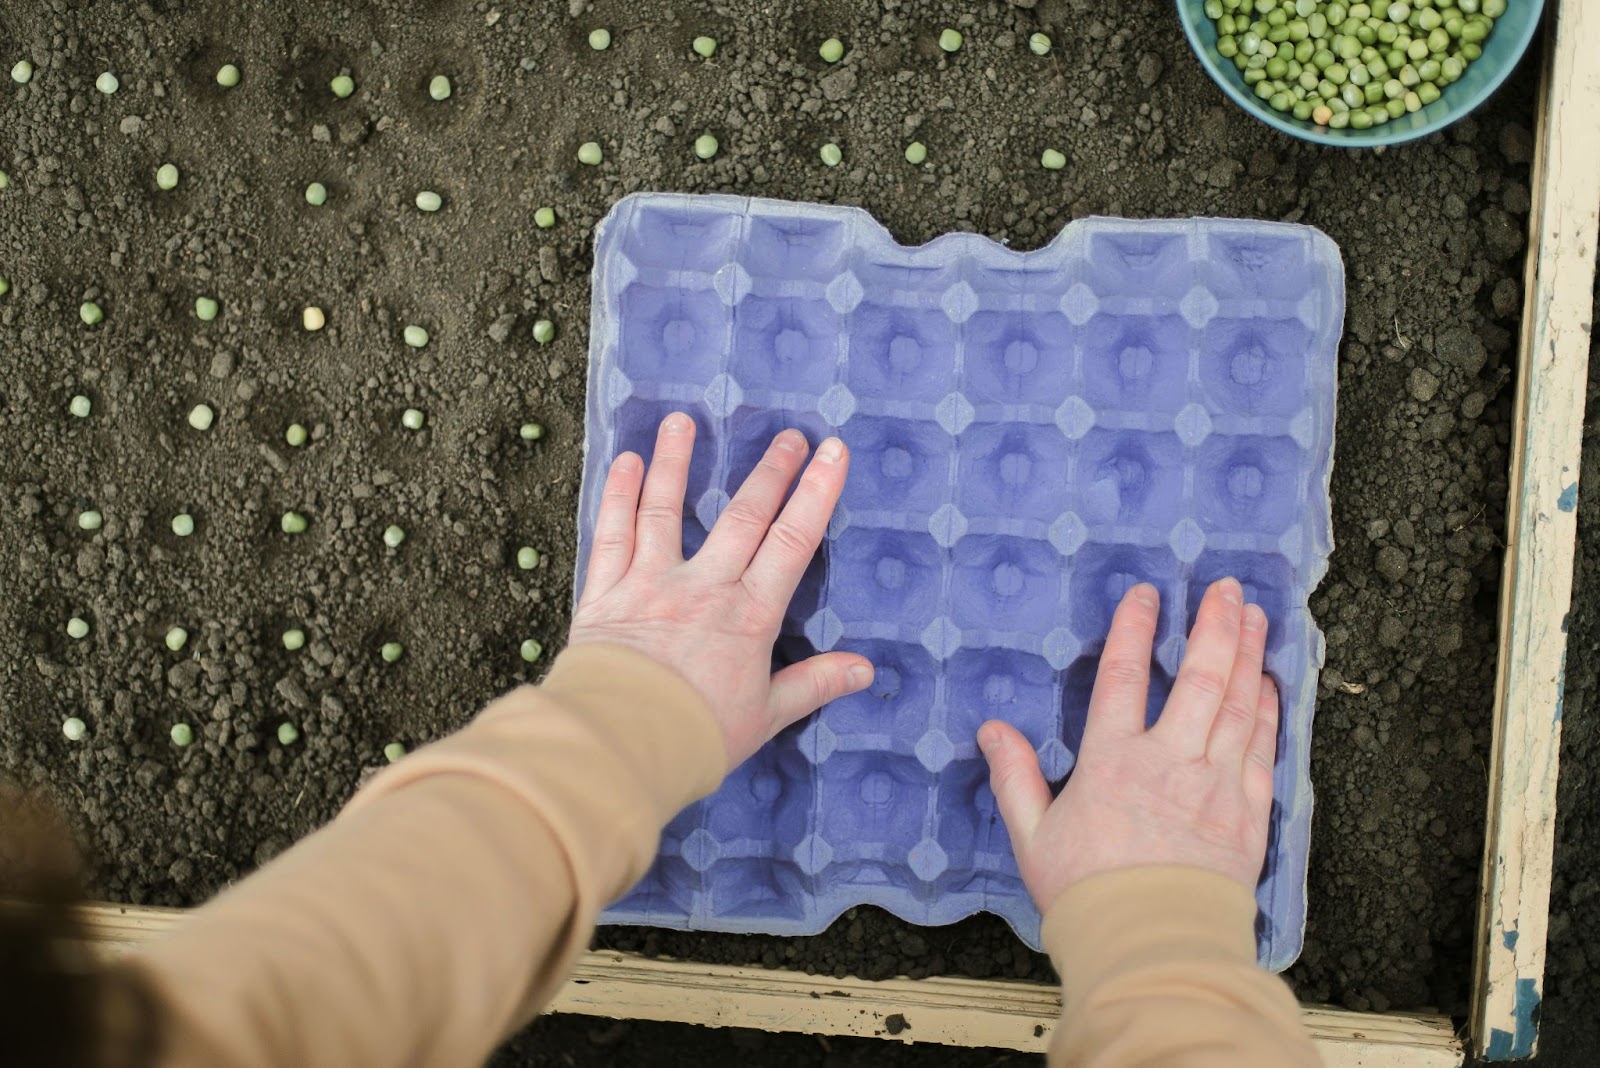 Using an empty egg carton to create equally spread holes for seeds in a bed